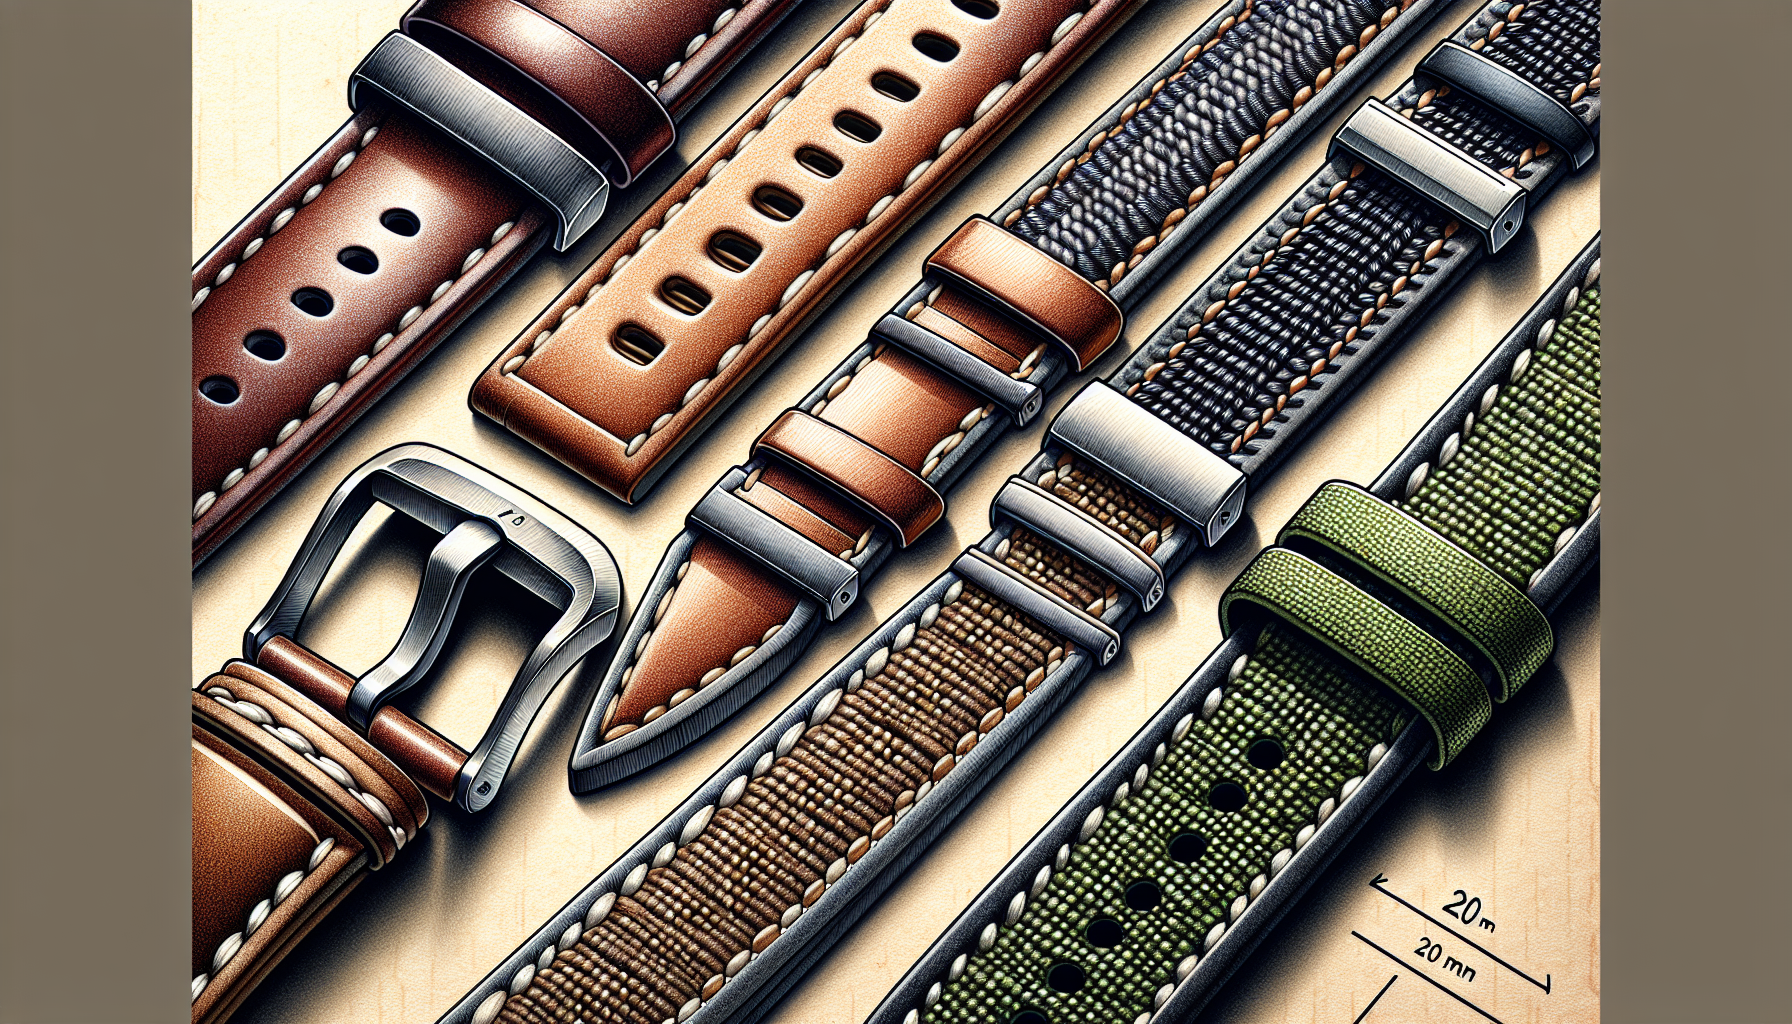 Variety of 20 mm watch straps including leather and metal